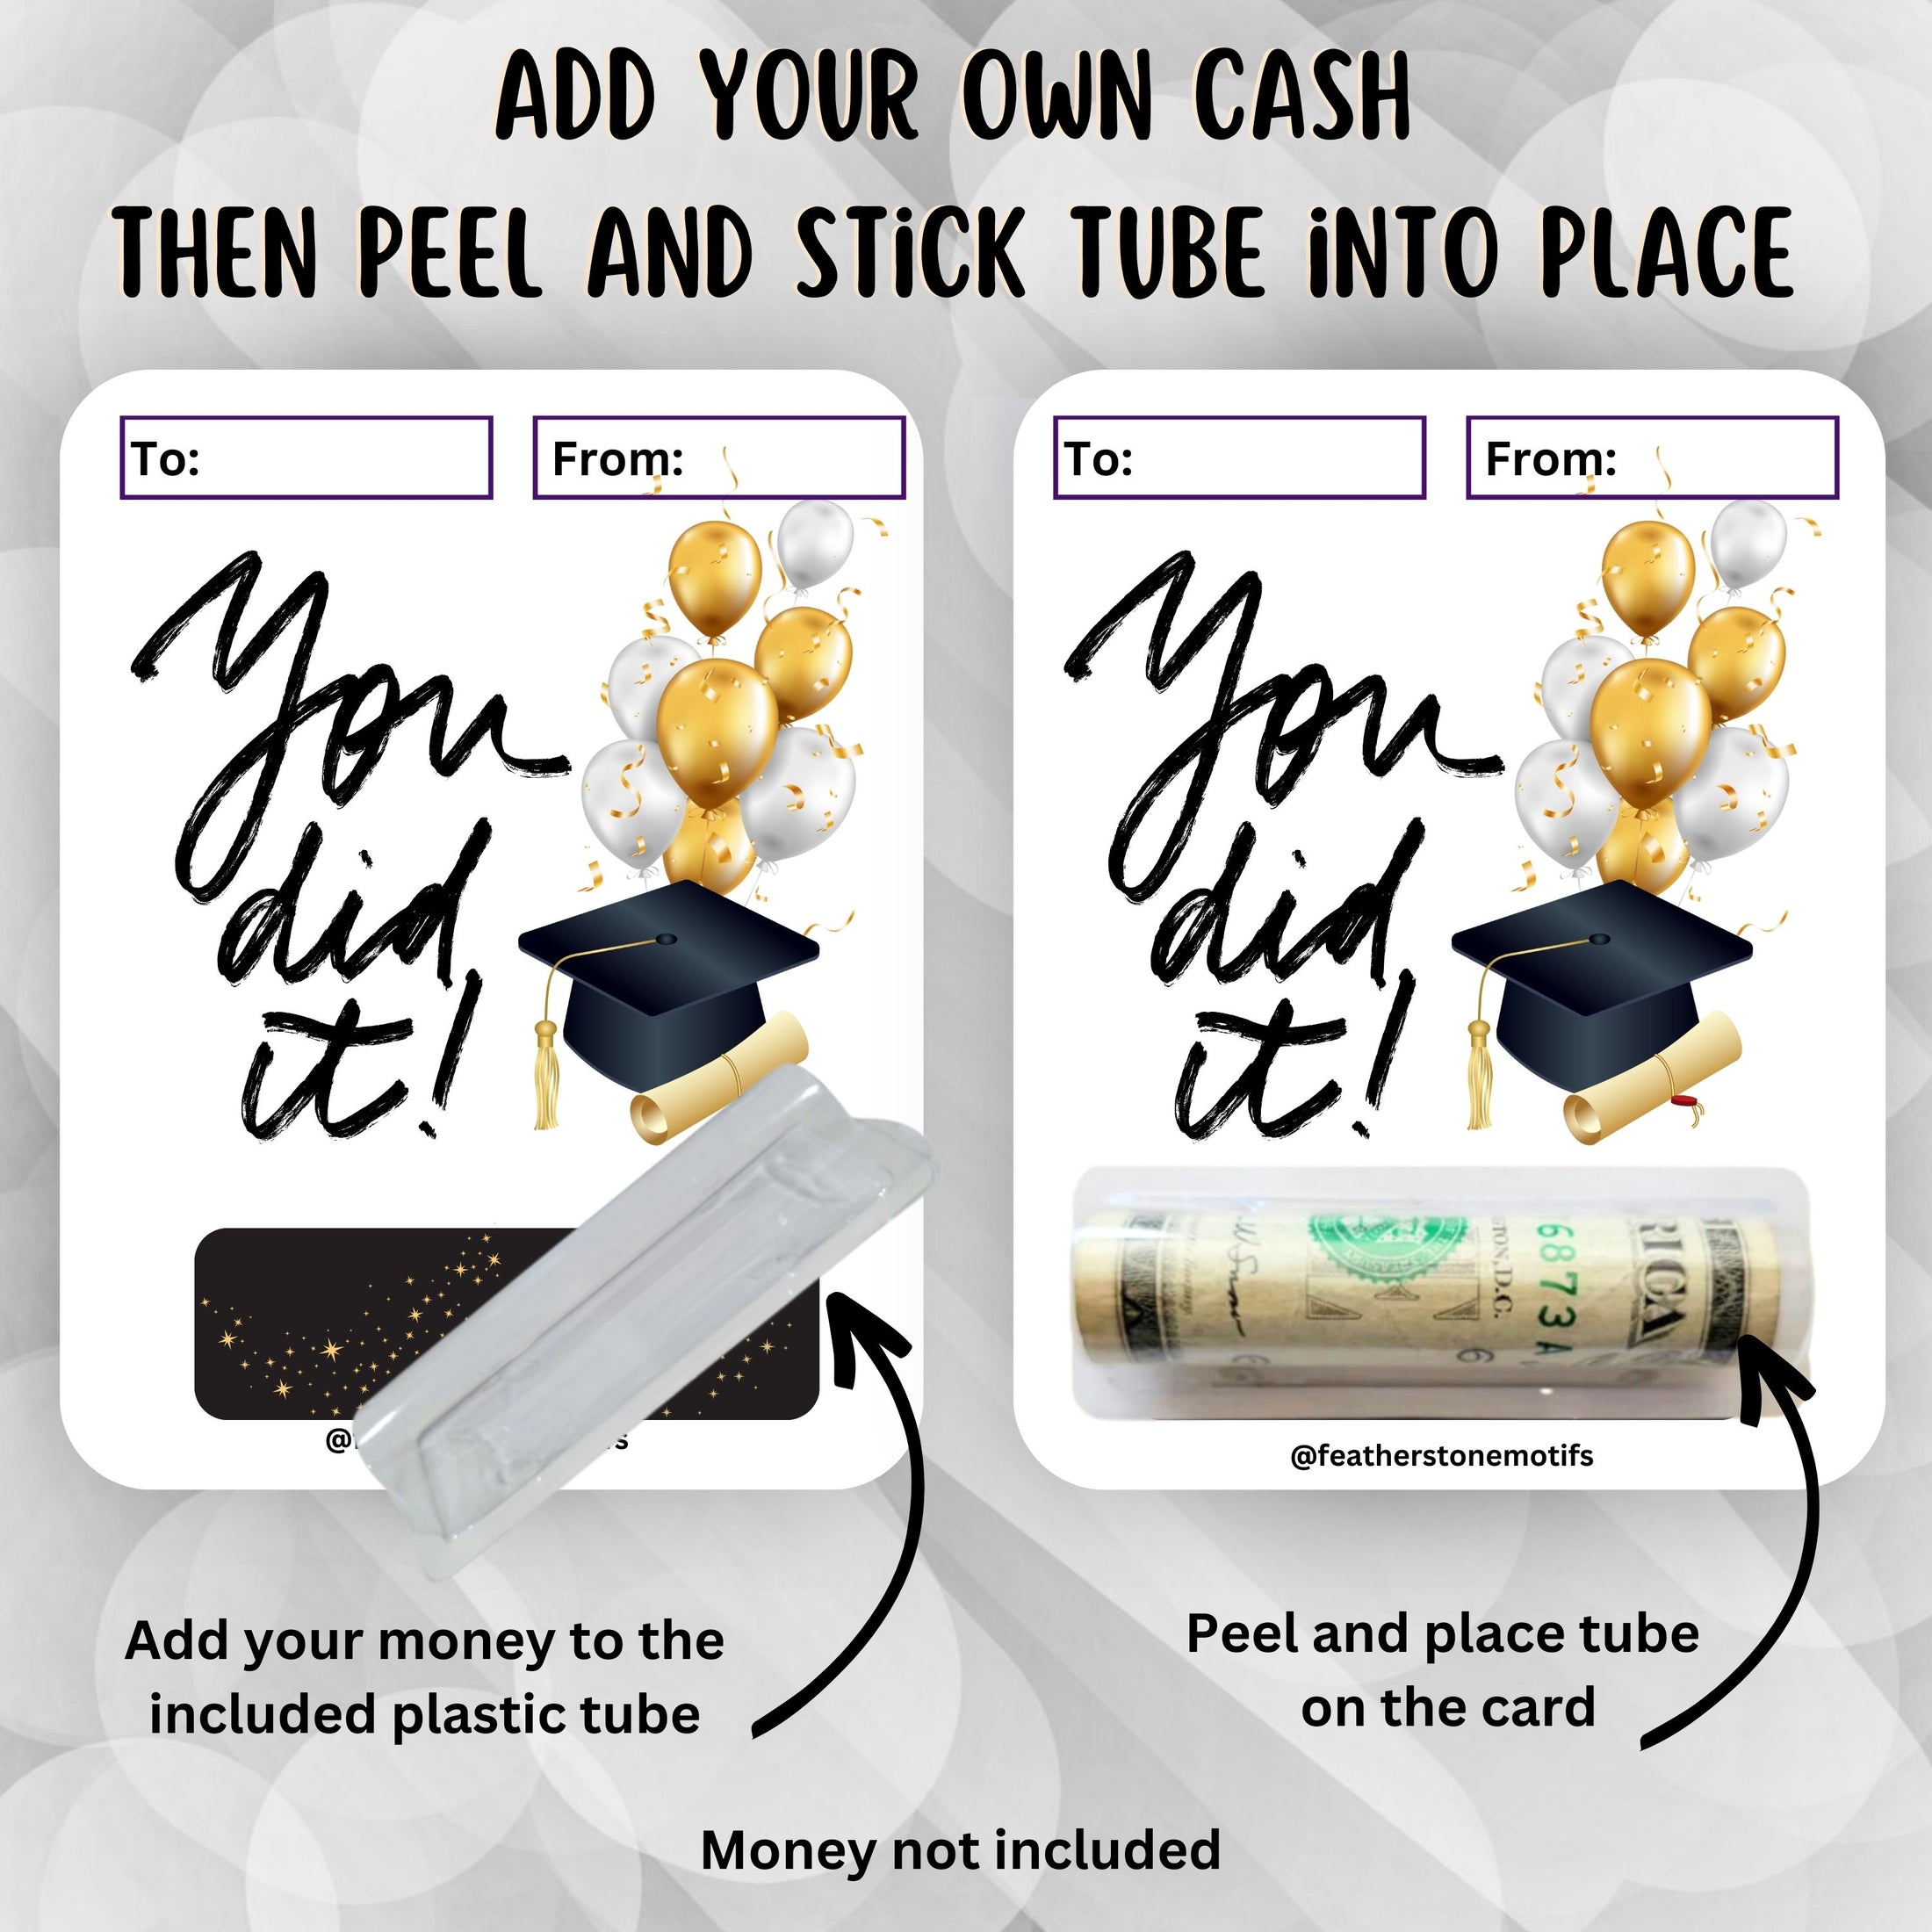 This image shows how to attach the money tube to the You Did It! Money Card.